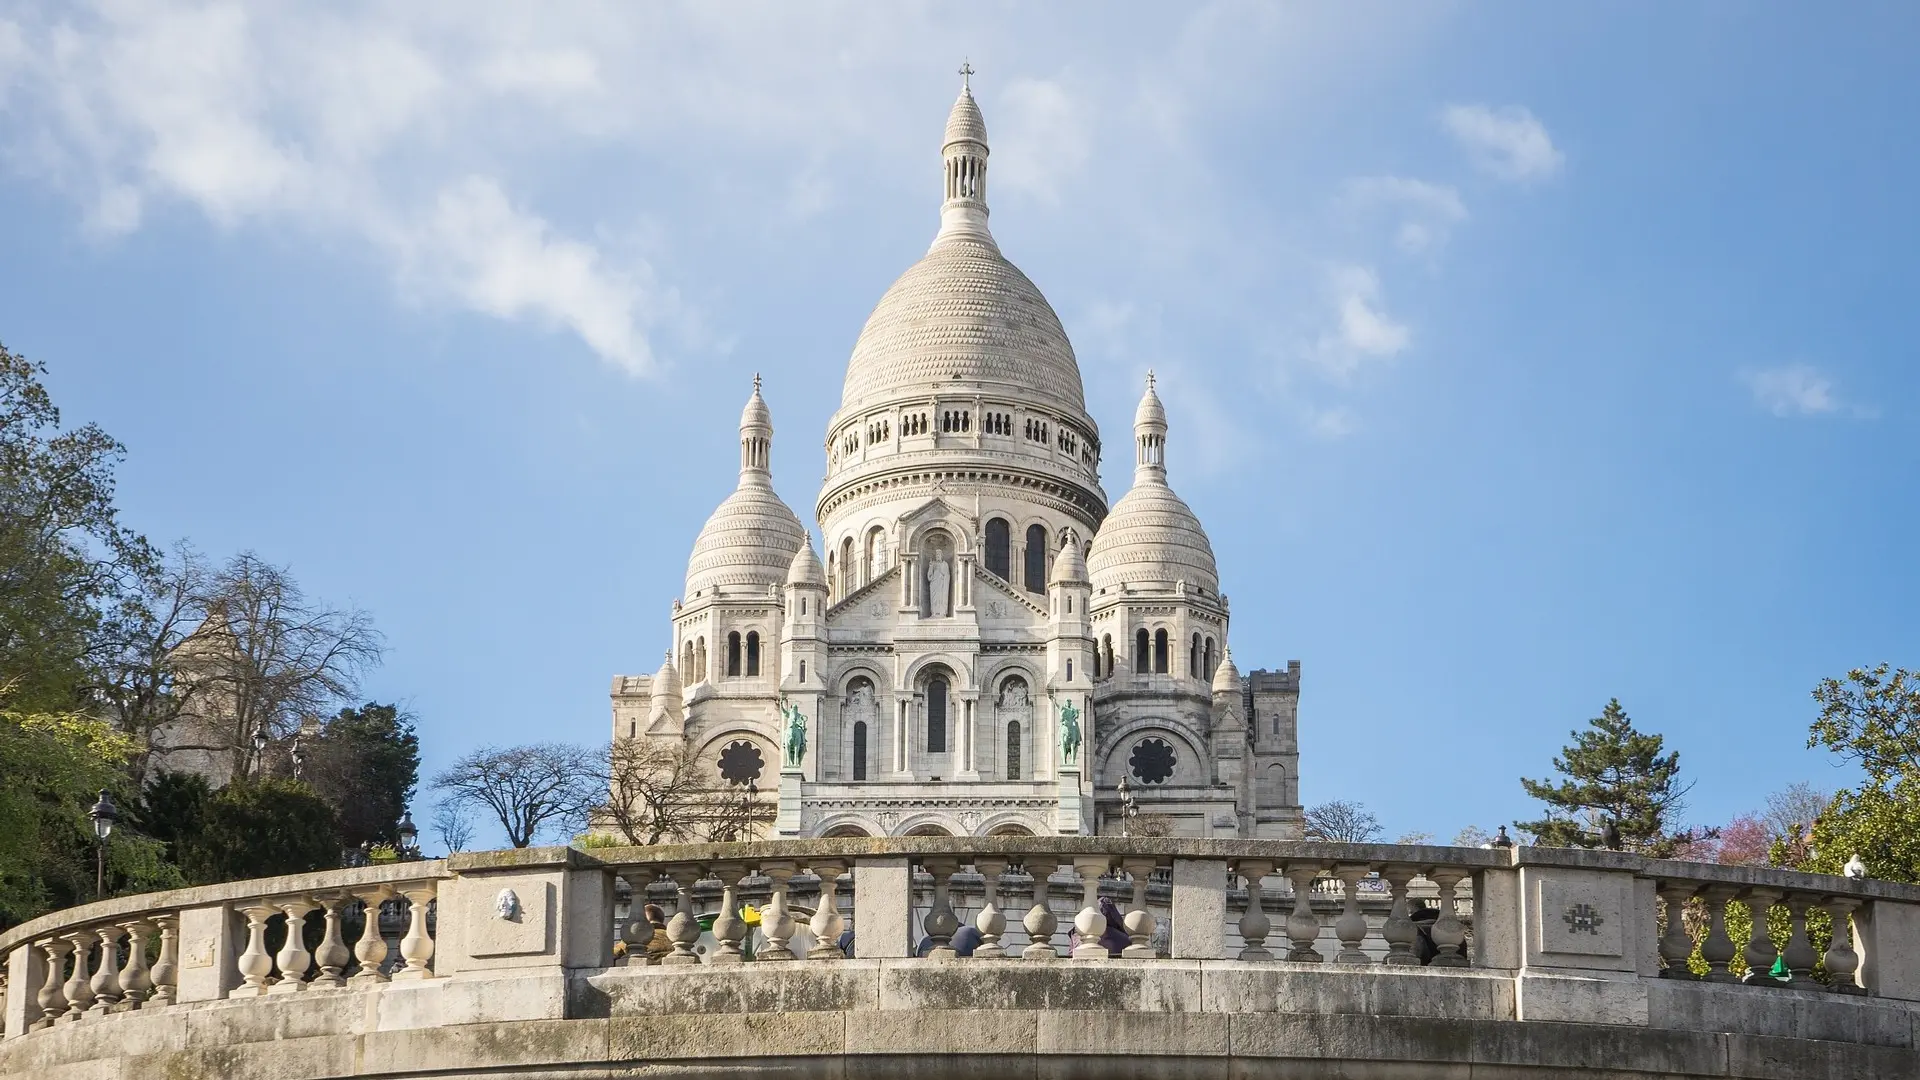 Lifestyle Toplists - Emily in Paris - her guide to the City of Light